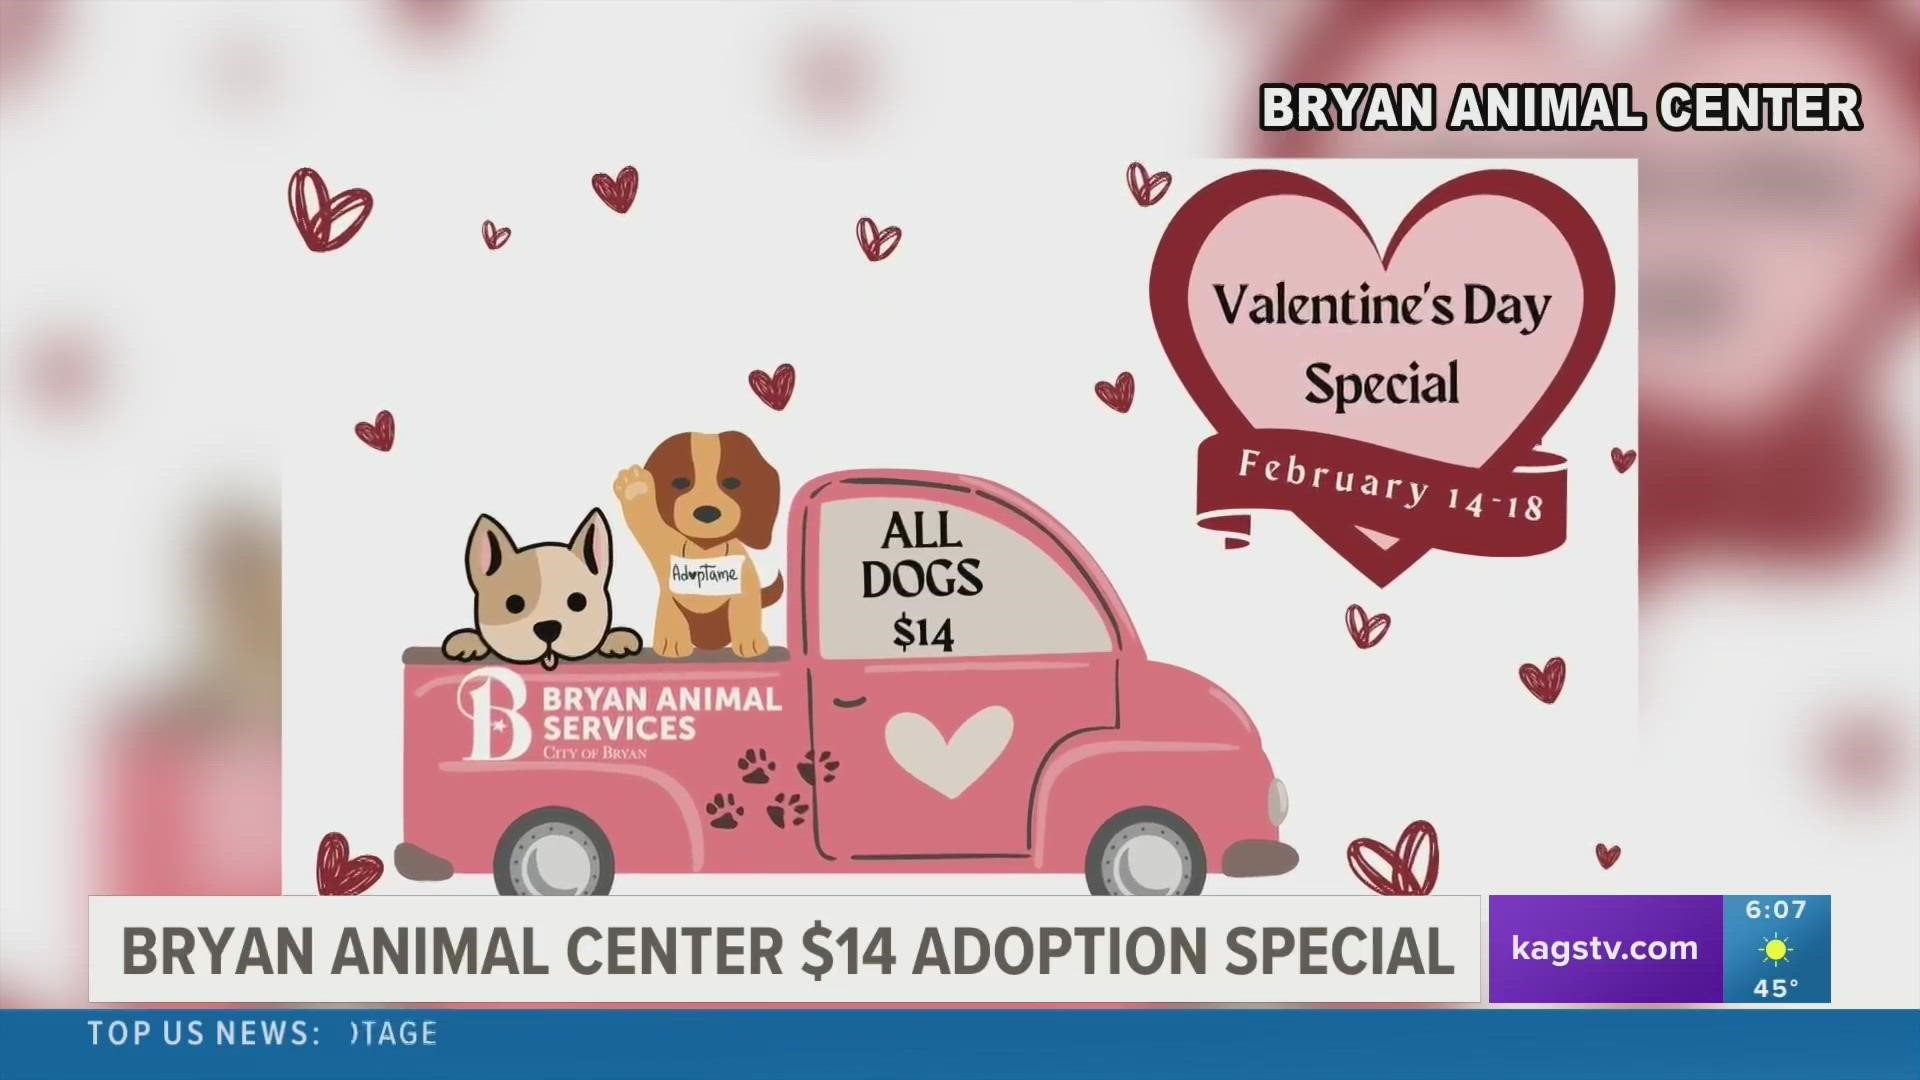 Surprise that special someone (or treat yourself) with a new furry friend for $14 starting on Valentine's Day.